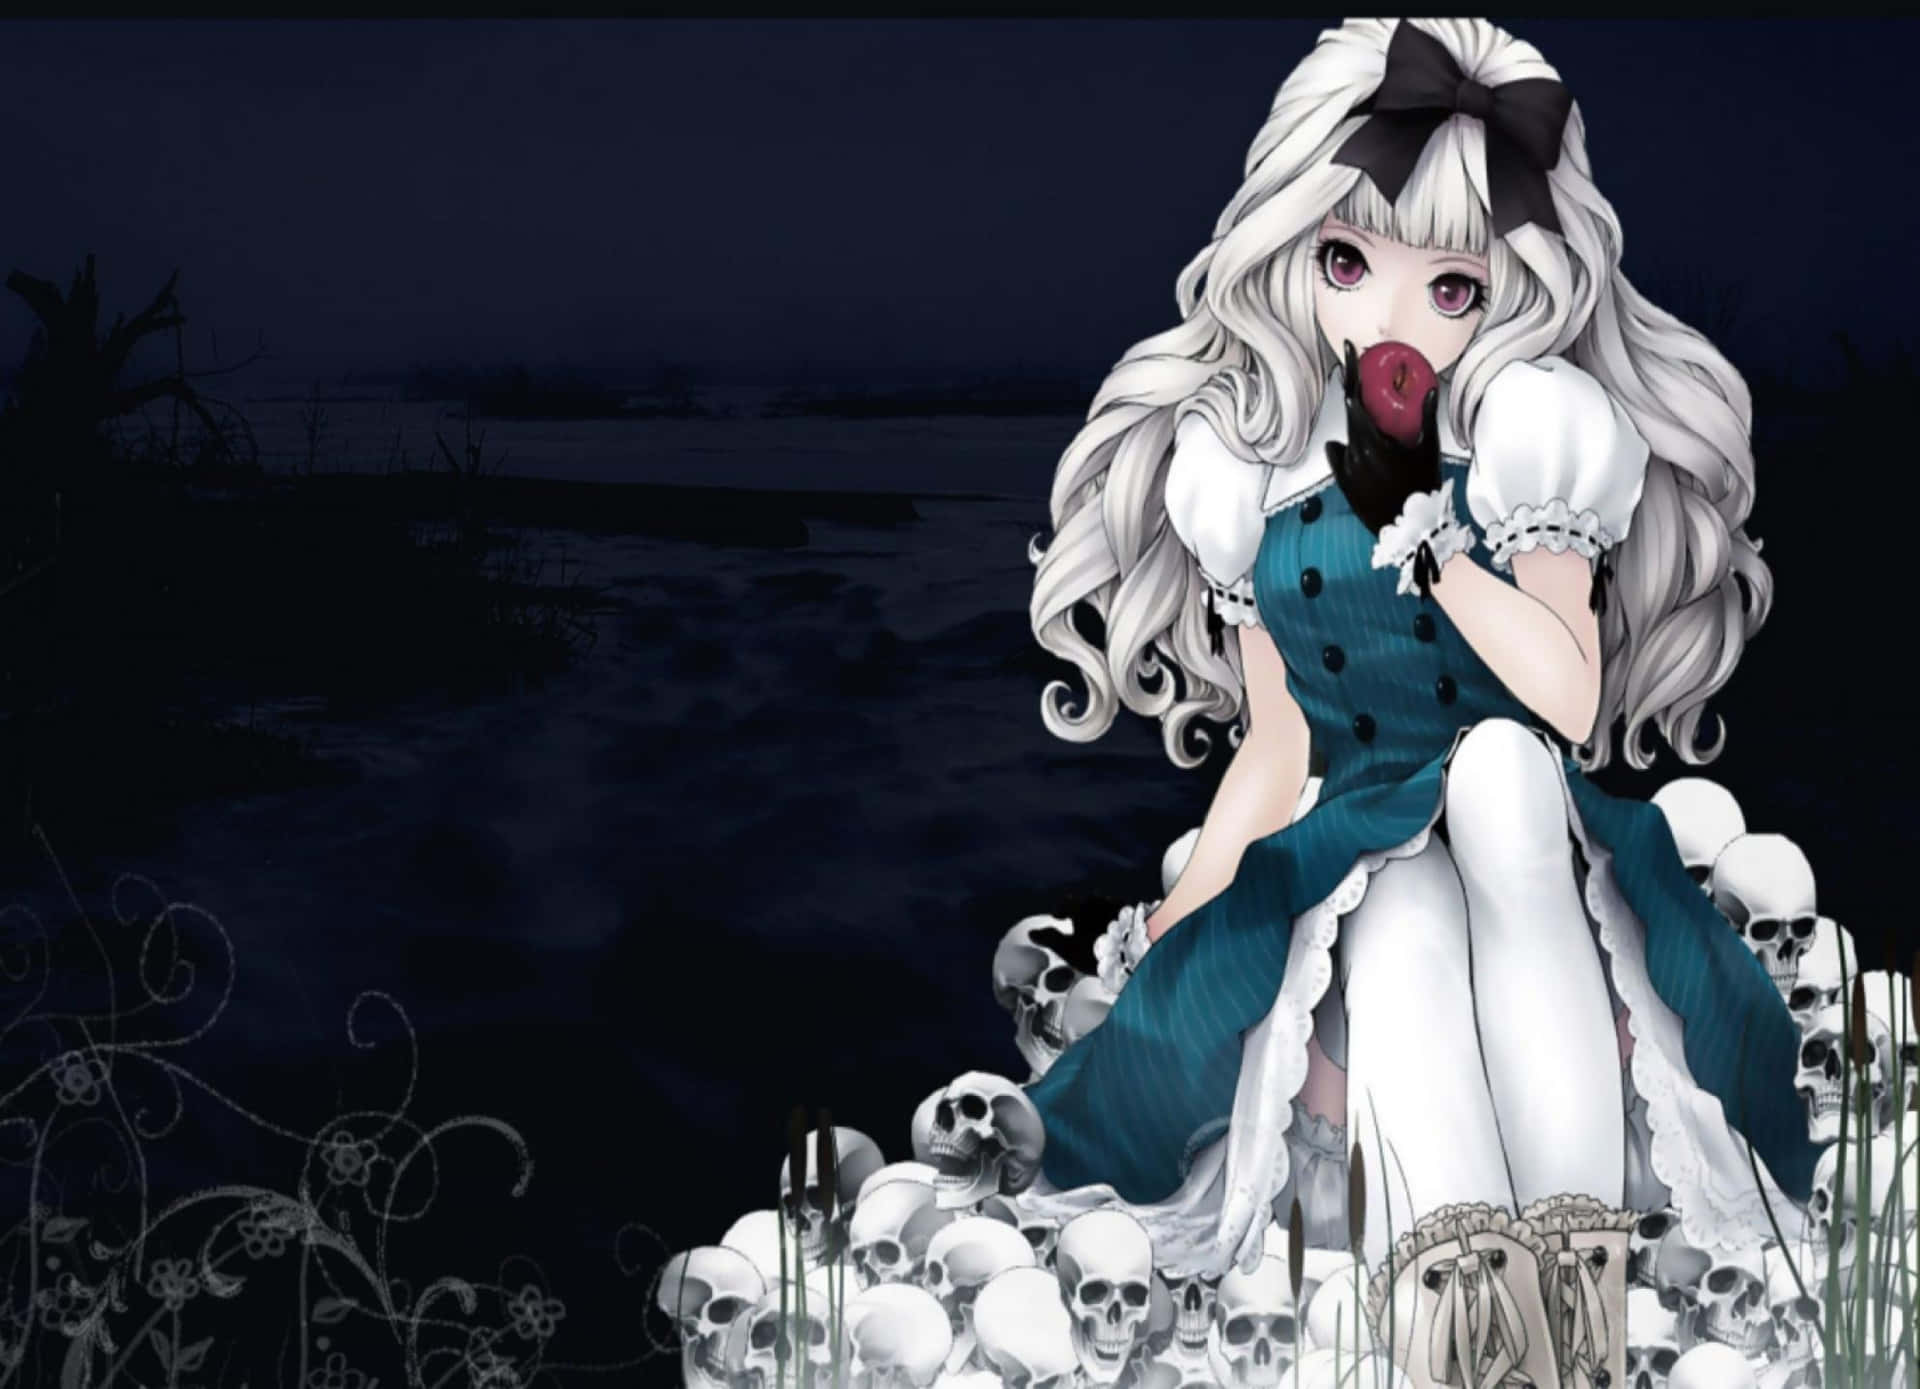 Scary Anime Alice Sits On Pile Of Skulls Wallpaper